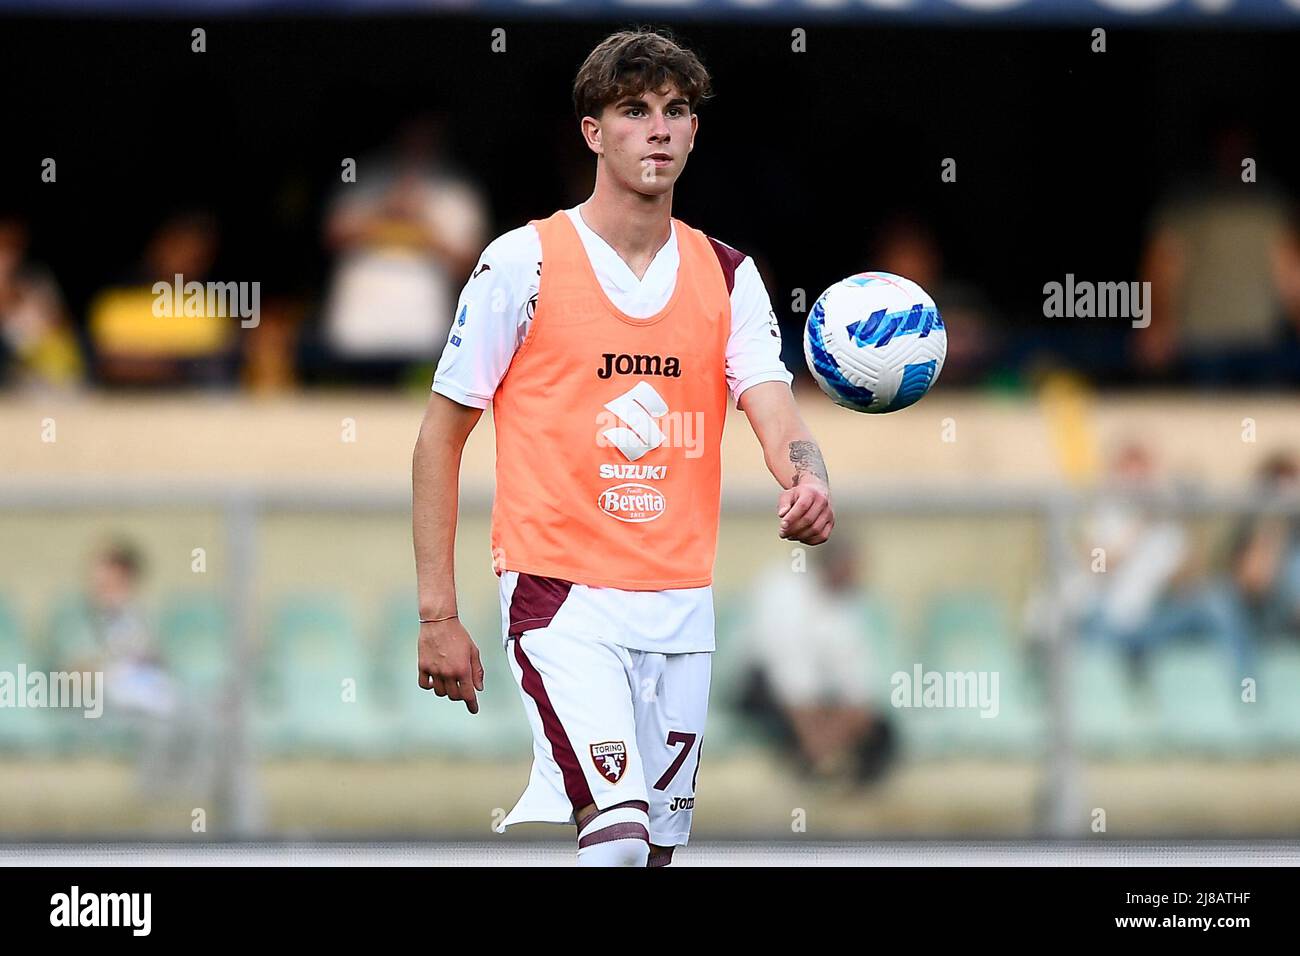 Verona, Italy. 14 May 2022. Andrei Anton of Torino FC warms up during the Serie A football match between Hellas Verona FC and Torino FC. Credit: Nicolò Campo/Alamy Live News Stock Photo